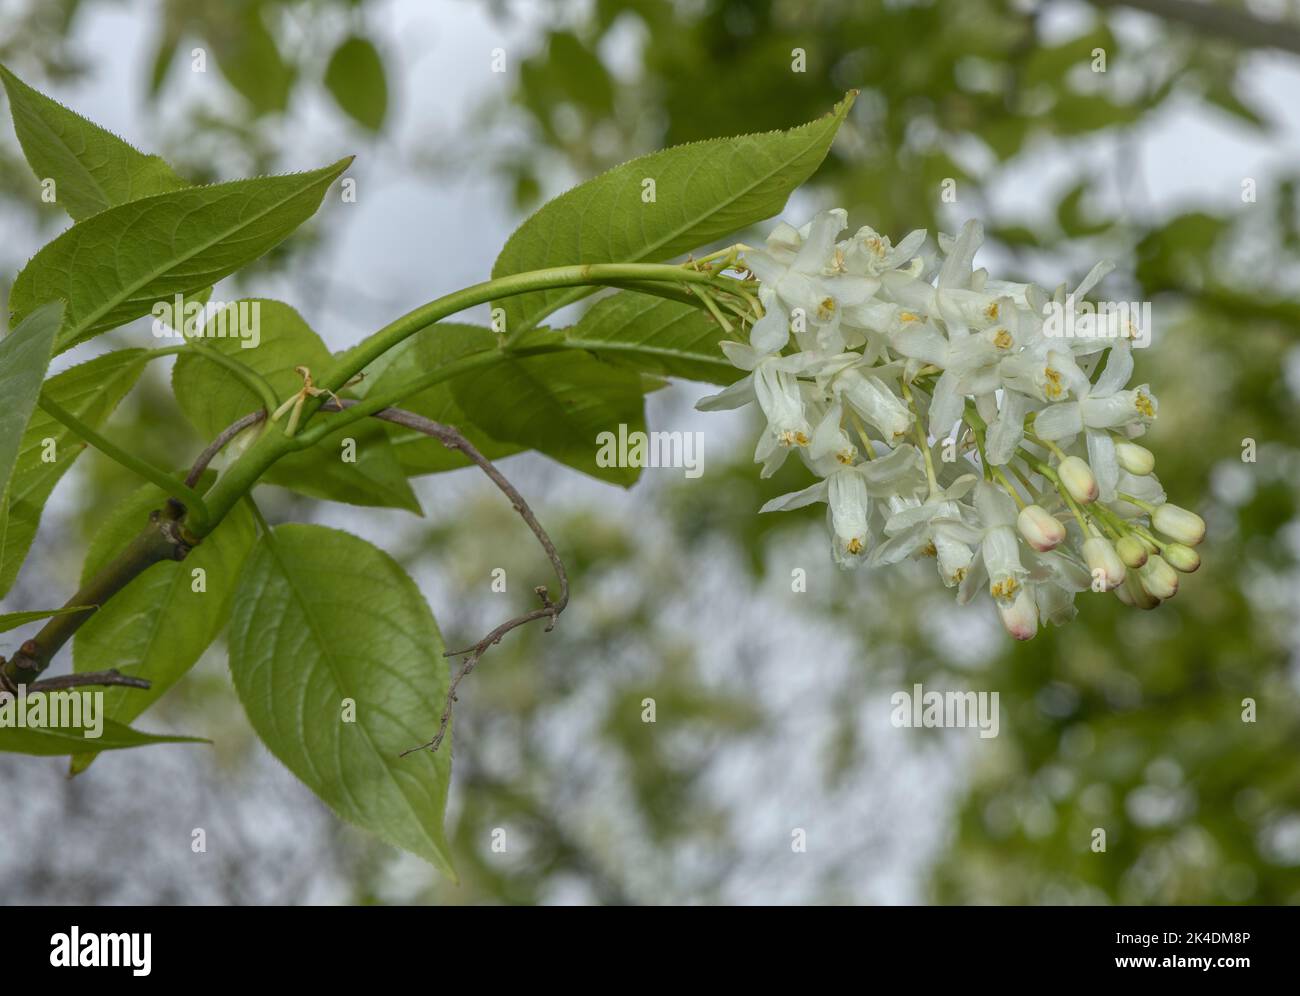 Caucasian bladdernut, Staphylea colchica, in flower, from the Caucasus, Stock Photo